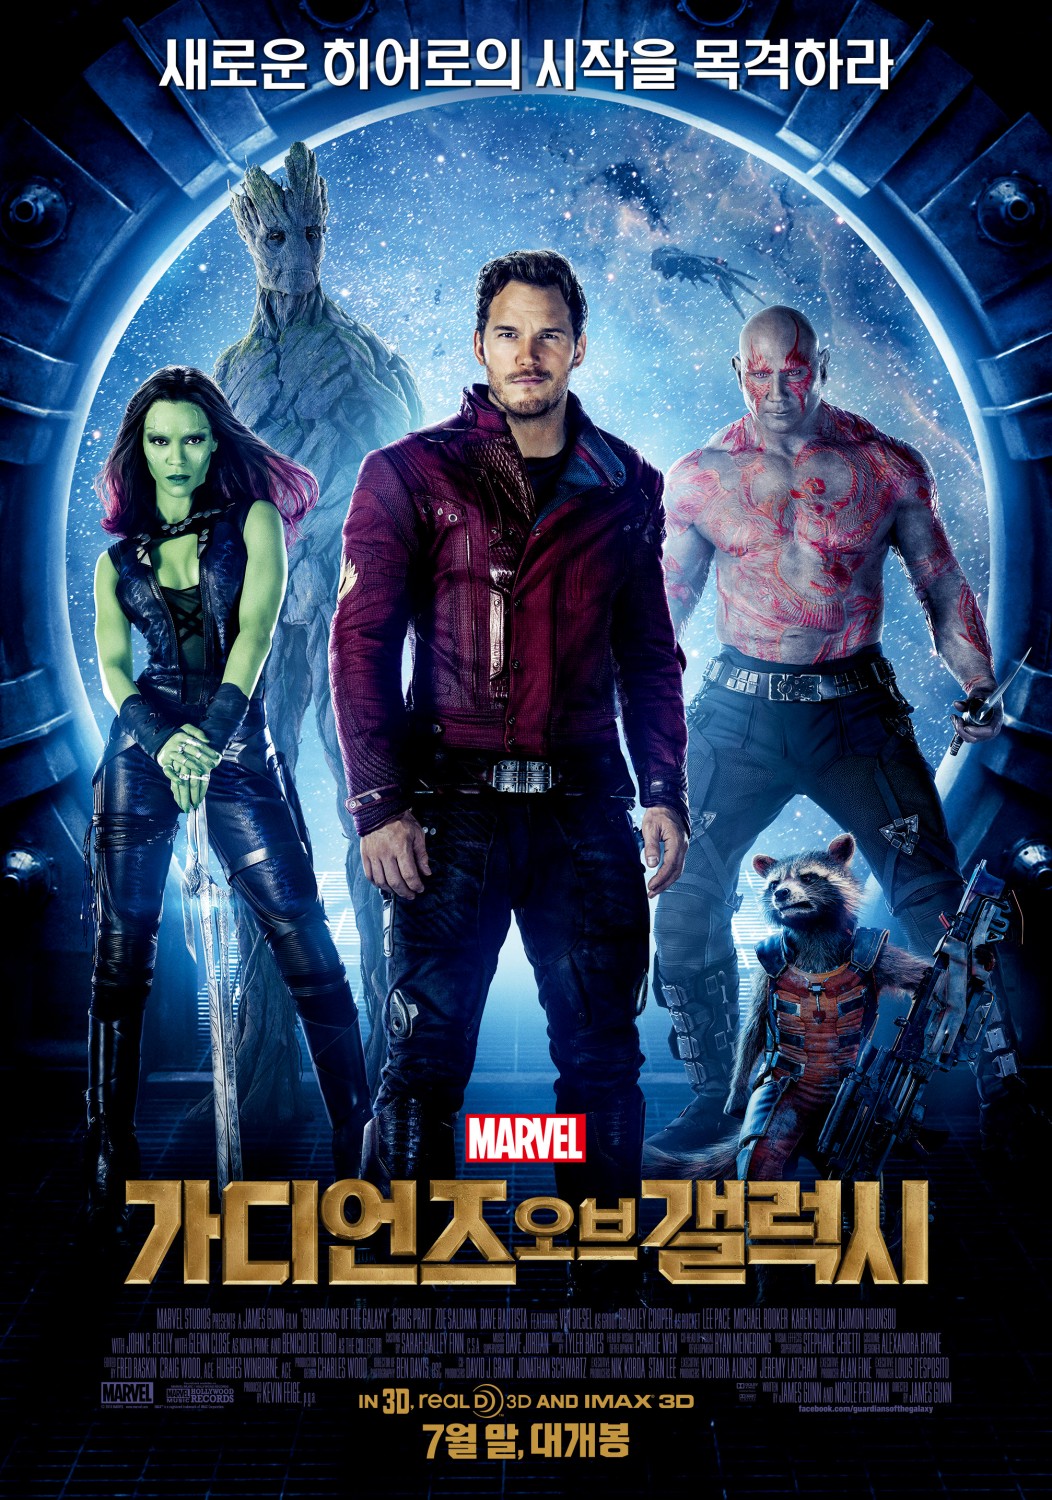 GOTG has done well all over-even on the Skrull homeworld